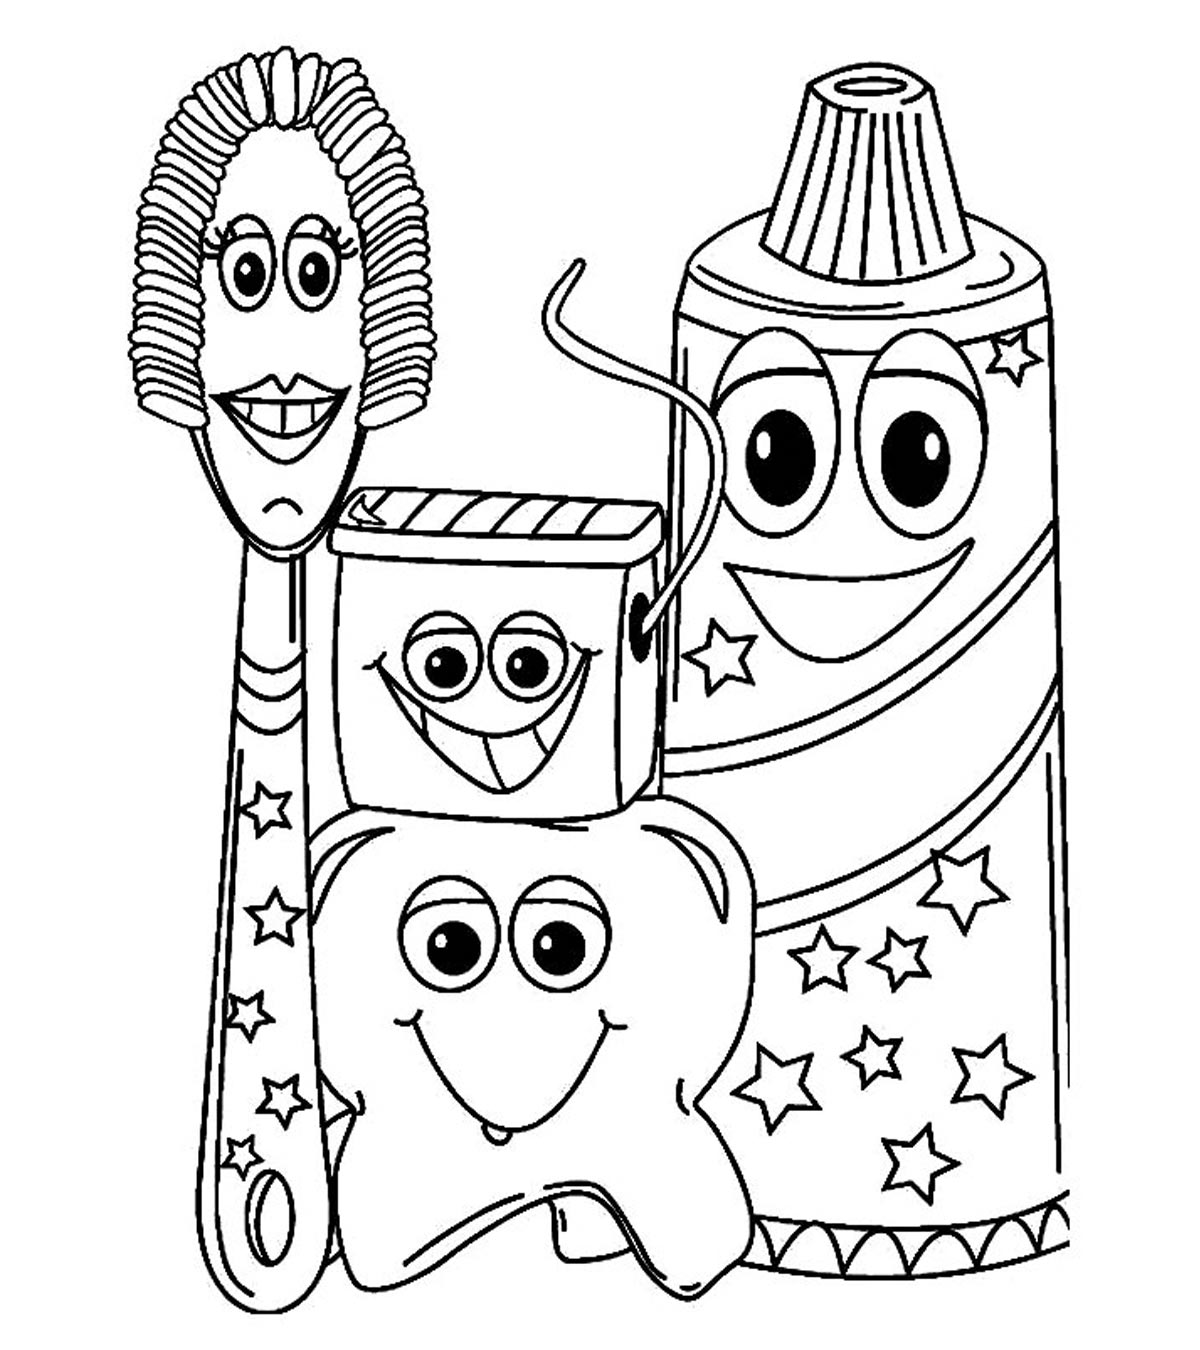 Free Dental Coloring Pages For Kids Find More Dental Coloring Page 